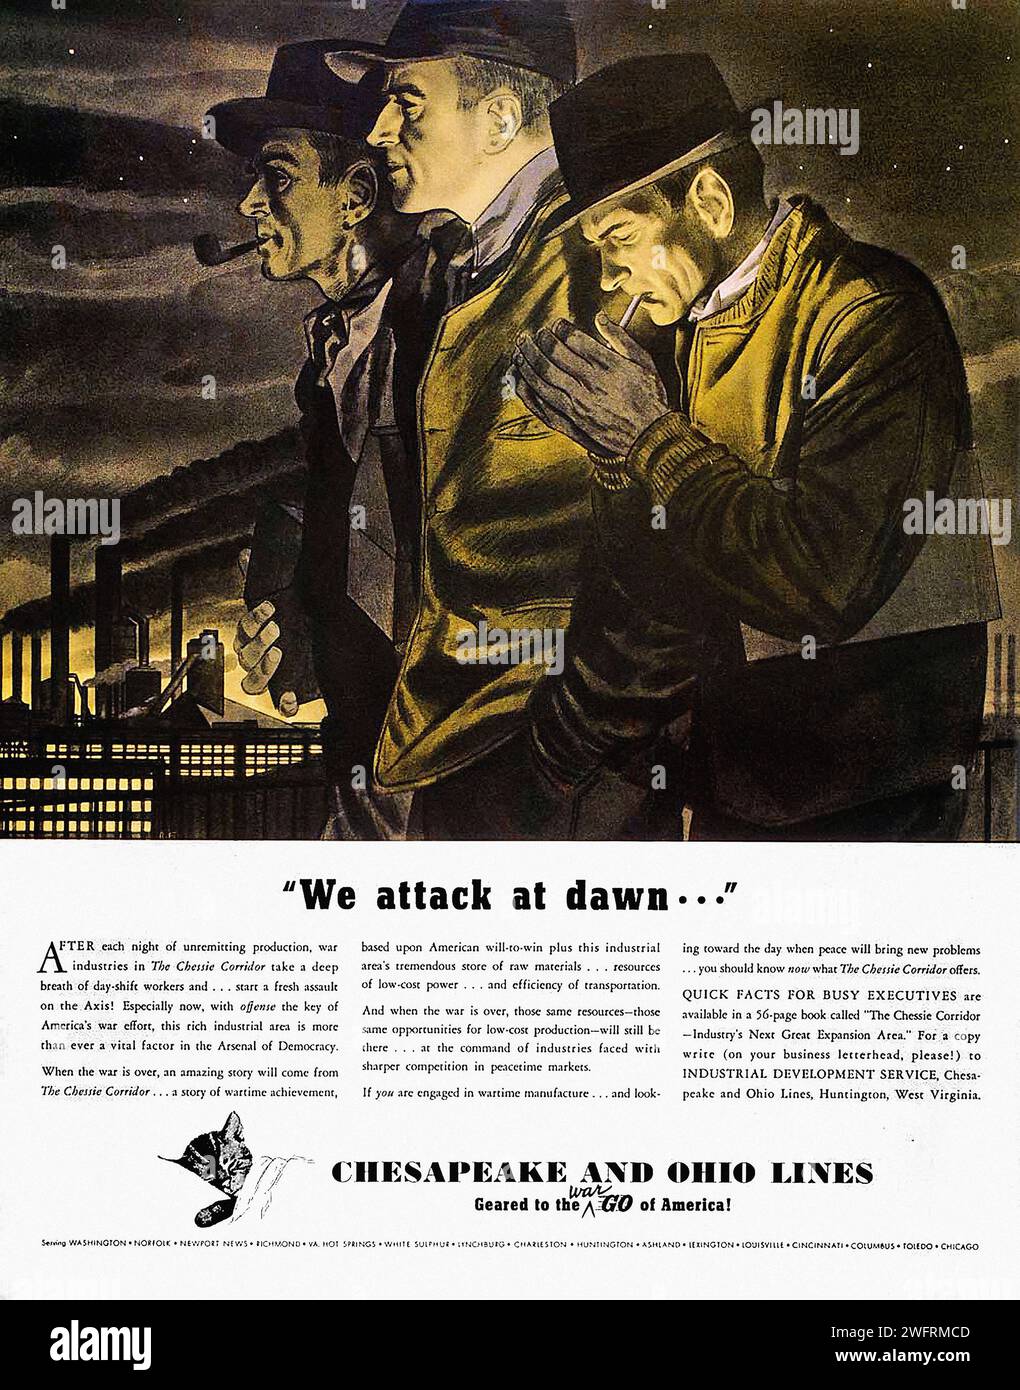 “We attack at dawn! Cheap and reliable… Ohio Lines. Geared to the '60s America!”  This image is a vintage advertisement poster for a company called “Ohio Lines”, dating back to the period of World War II in the United States. The poster, rendered in black and white with a yellow tint, features two men in suits and hats, one of them smoking a cigarette, standing in front of a factory at night. The text on the poster reads “We attack at dawn! Cheap and reliable… Ohio Lines. Geared to the '60s America!”. The background showcases a factory with smokestacks and a train, adding to the industrial the Stock Photo